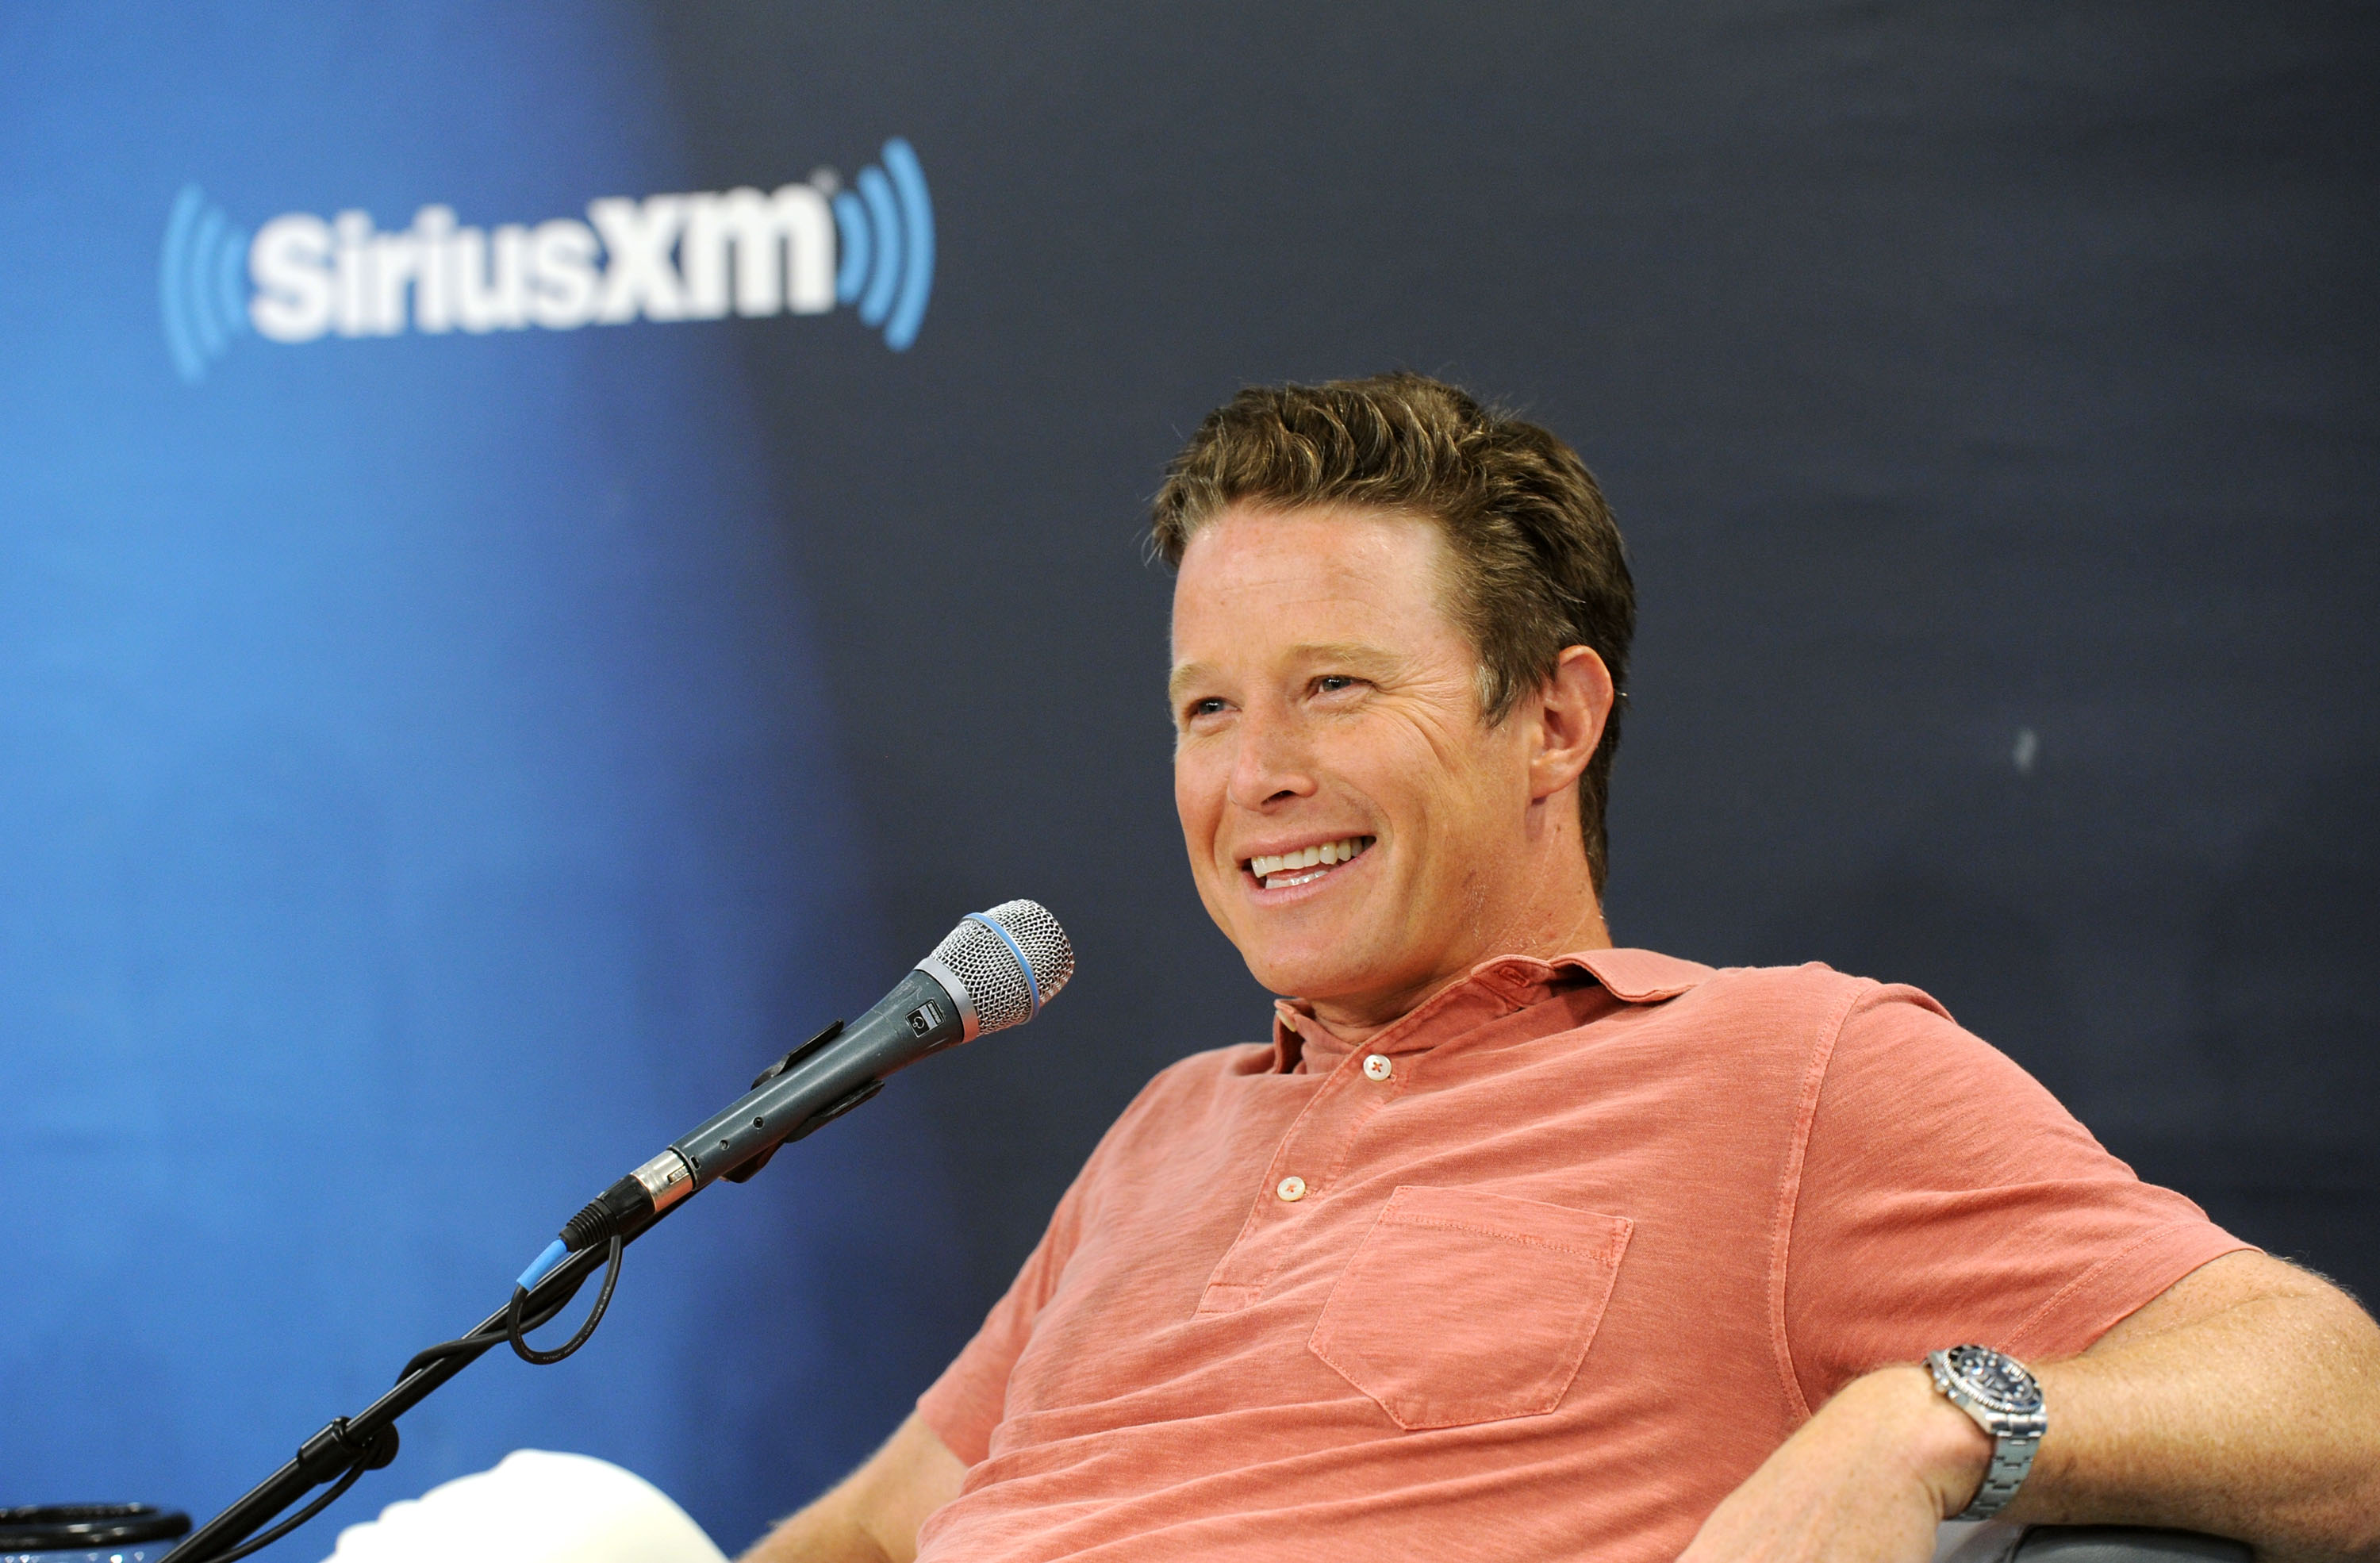 NBC News' Billy Bush in conversation with Jeff Rossen for SiriusXM's TODAY Show Radio at SiriusXM Studios on August 22, 2016 in New York City. (Craig Barritt—Getty Images for SiriusXM)